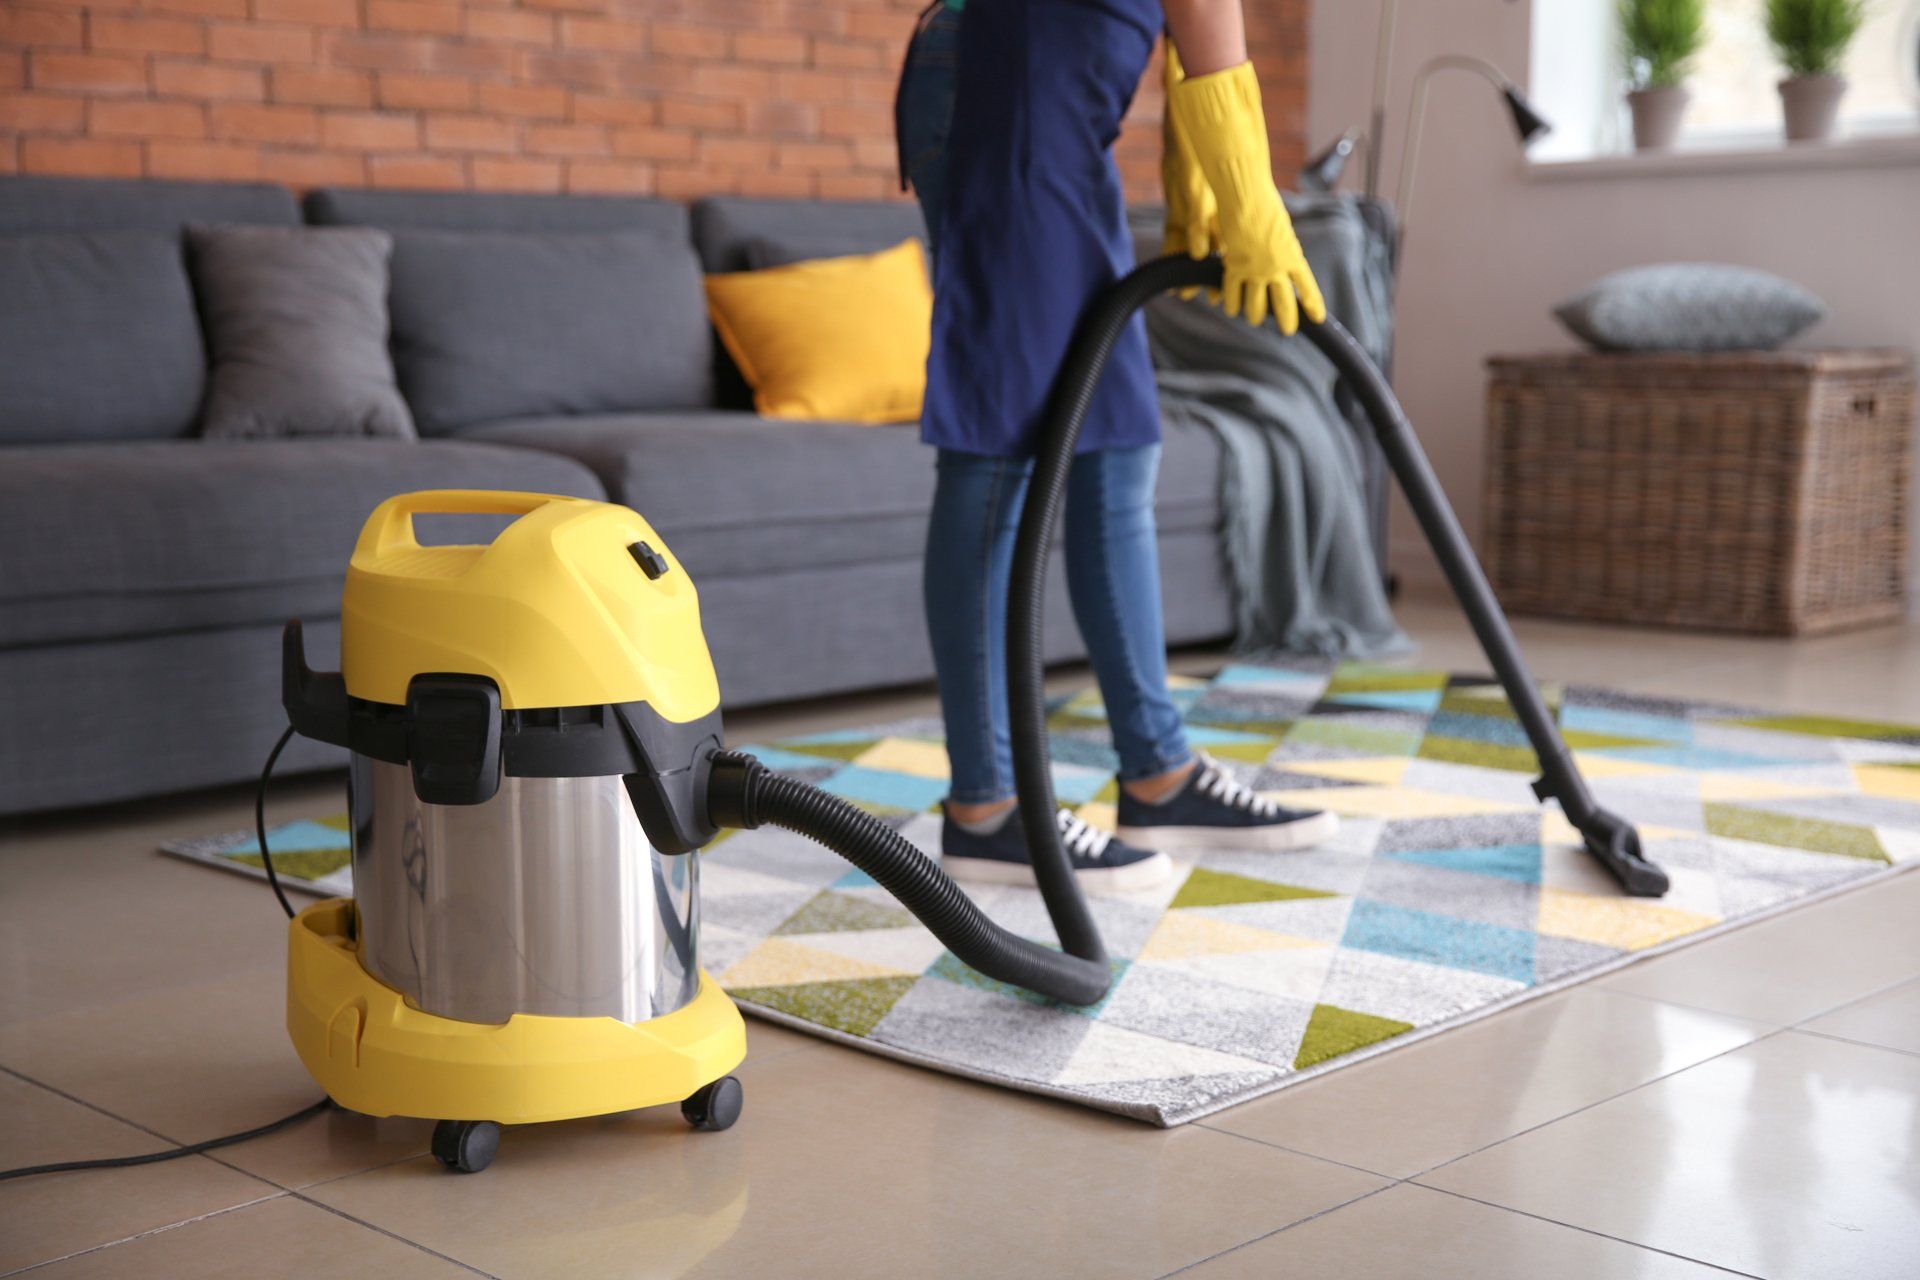 Hoovering an apartment